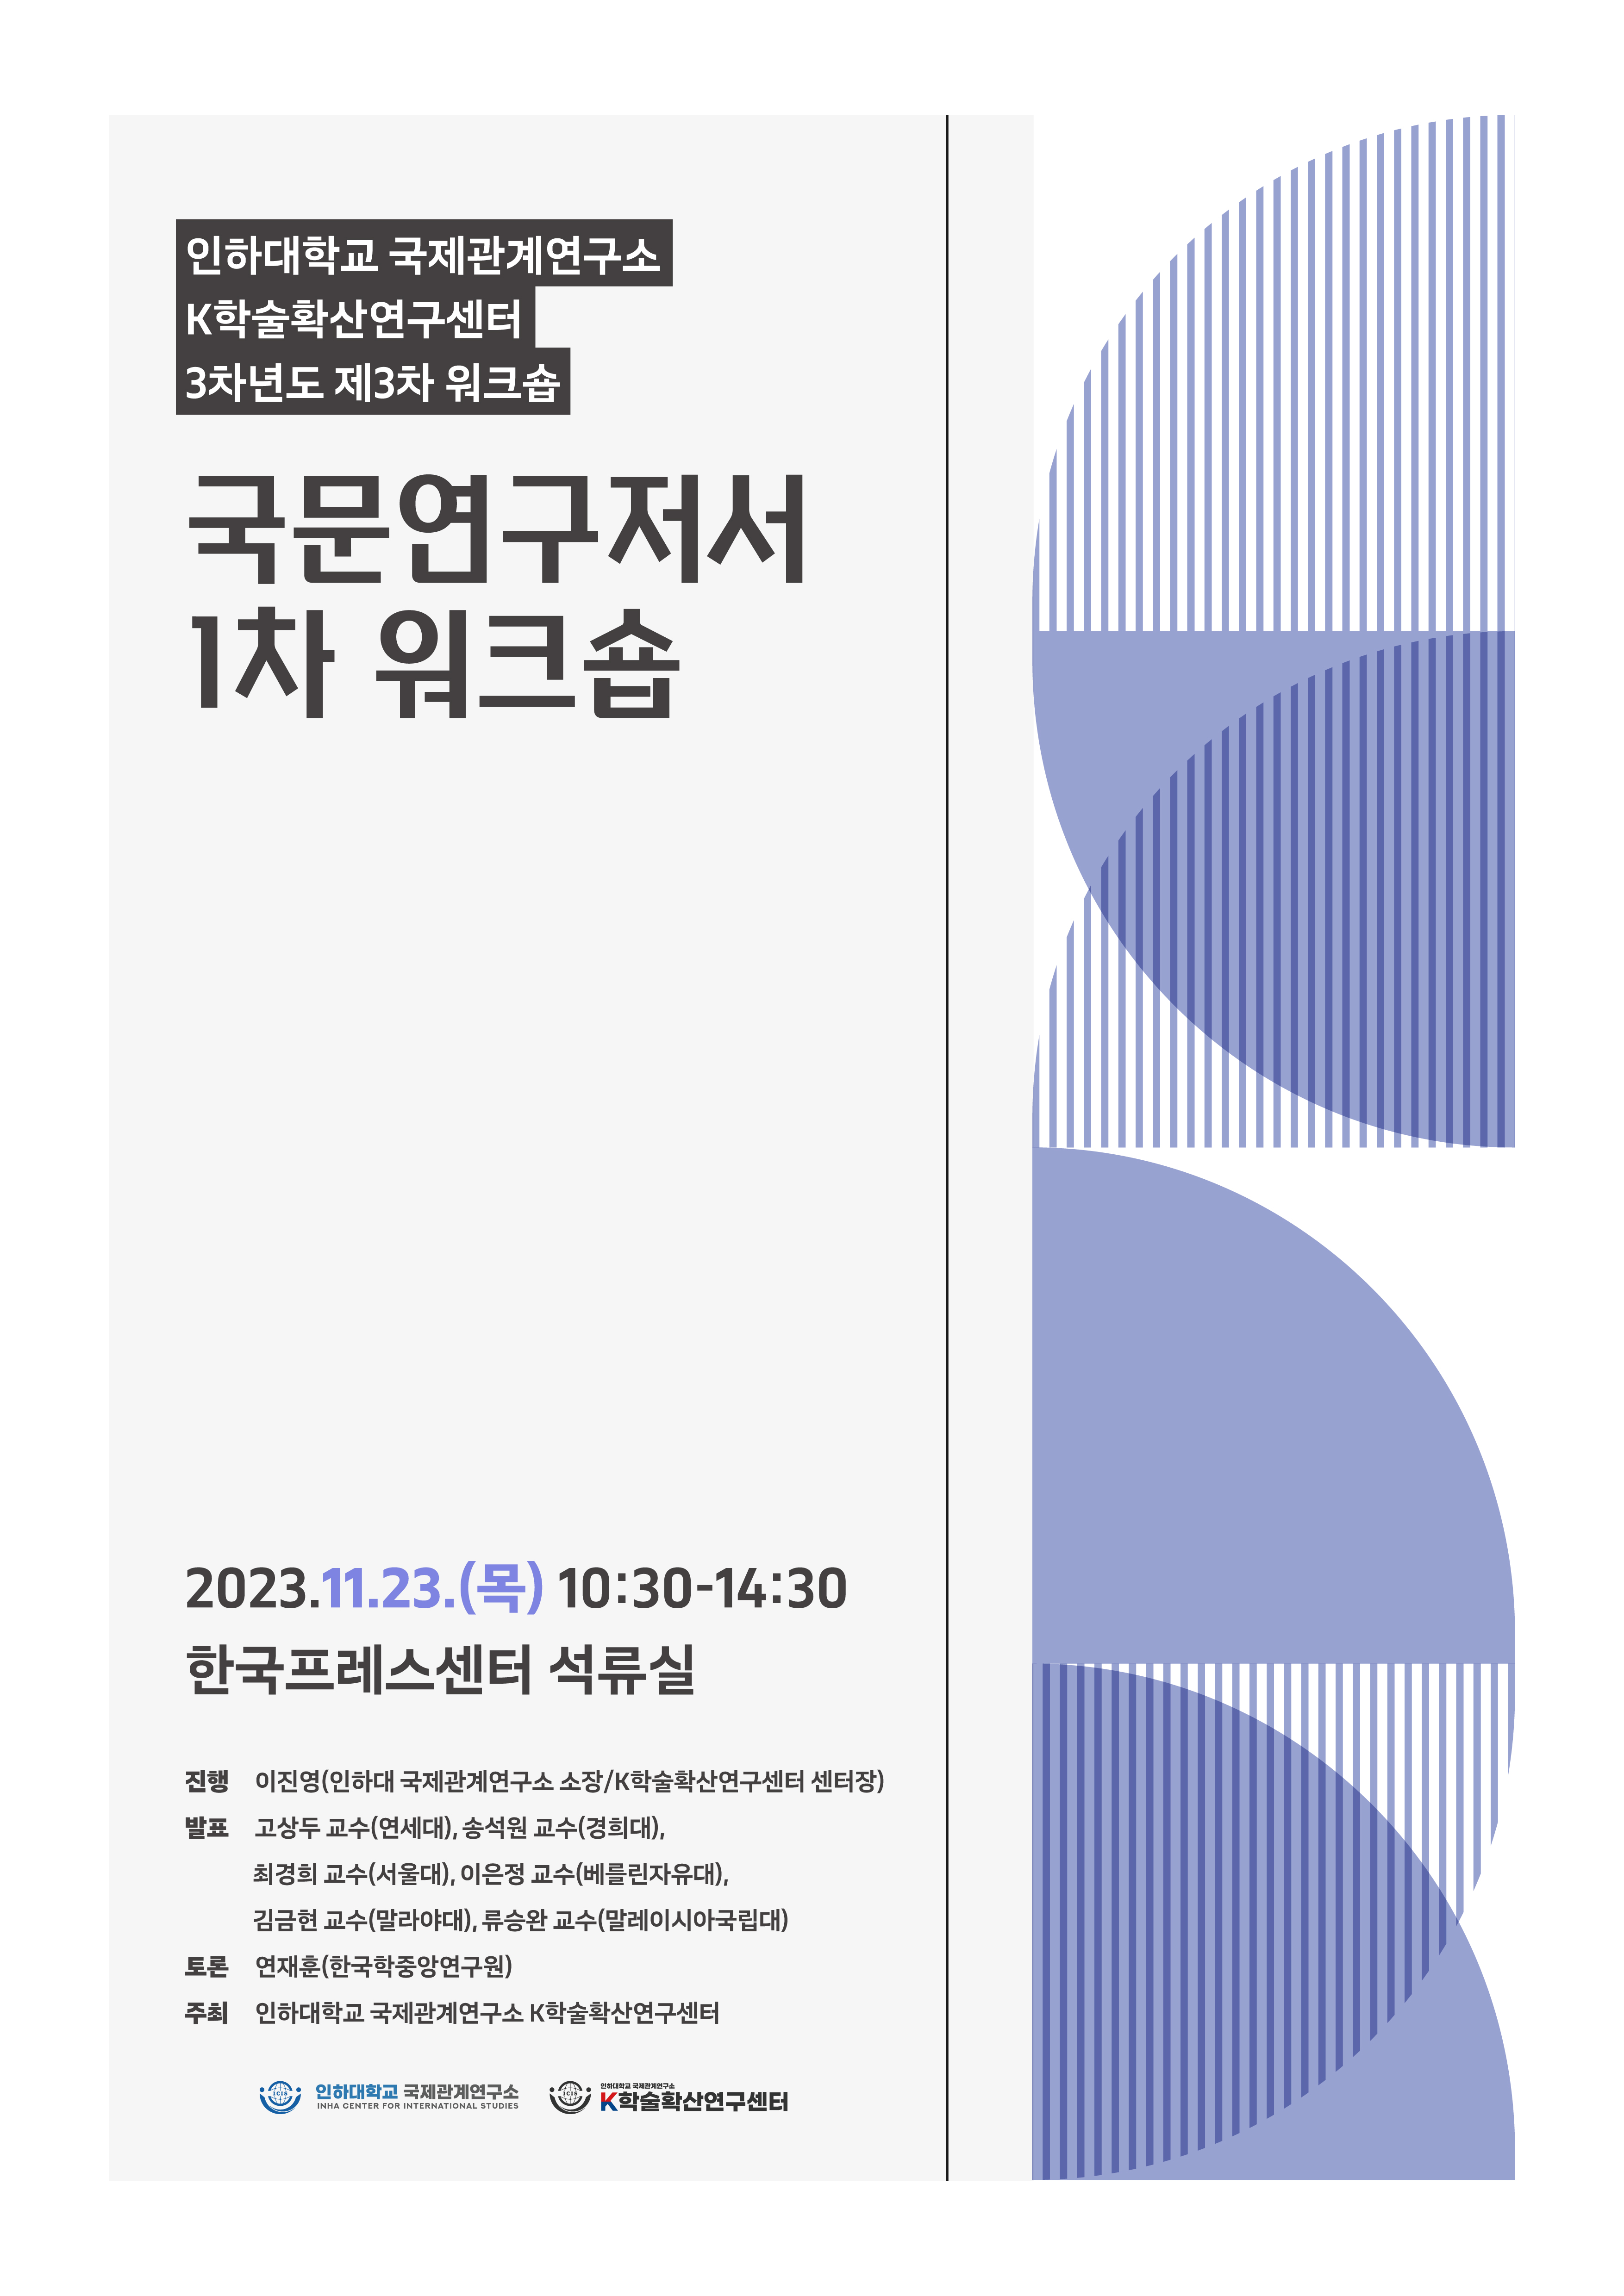 Korean Research Monograph First Workshop                                 썸네일